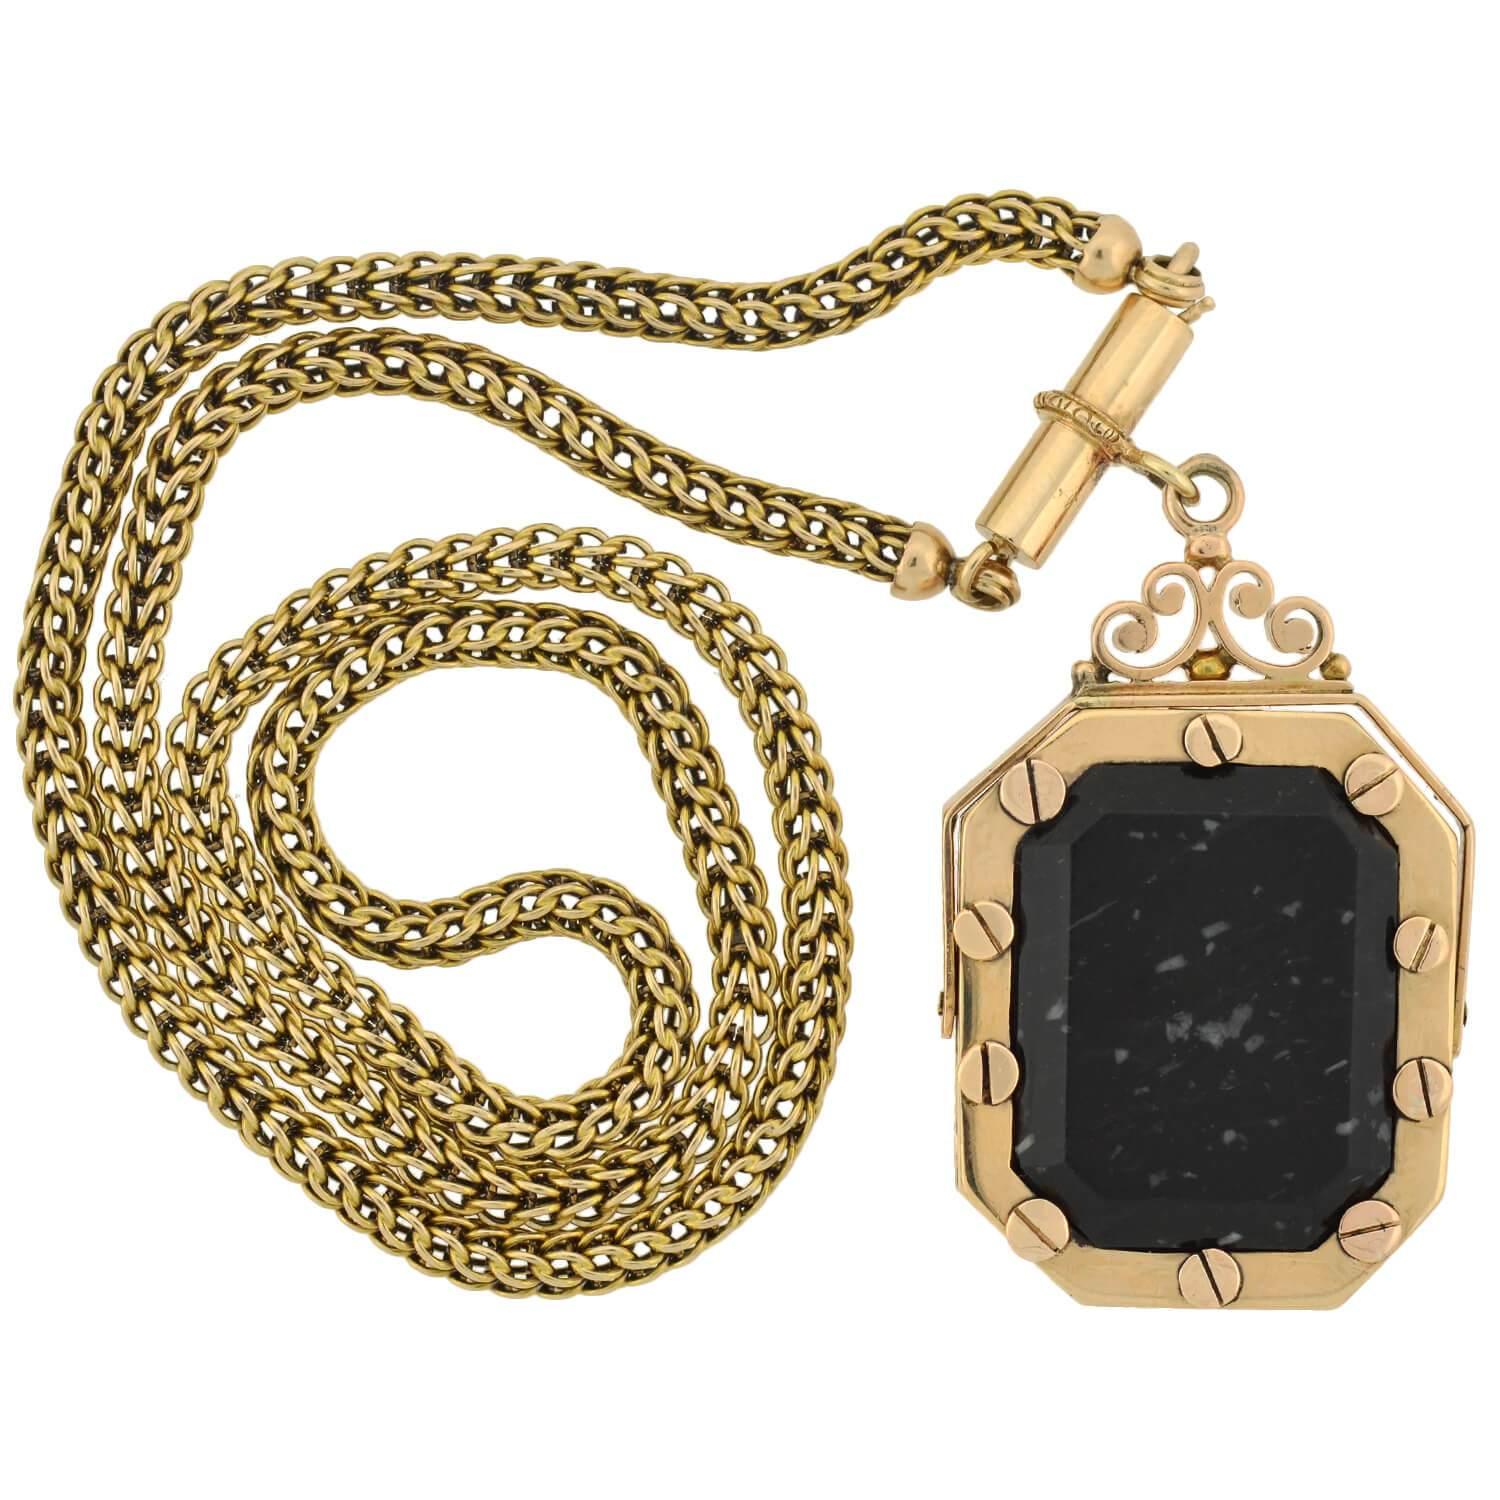 A fob is an adornment or a seal that hangs from the ribbon or chain of a pocket watch. Its purpose is to decorate or add weight to the watch chain itself, making it easier for the watch to be withdrawn from a pocket. A spinner or swivel fob has two